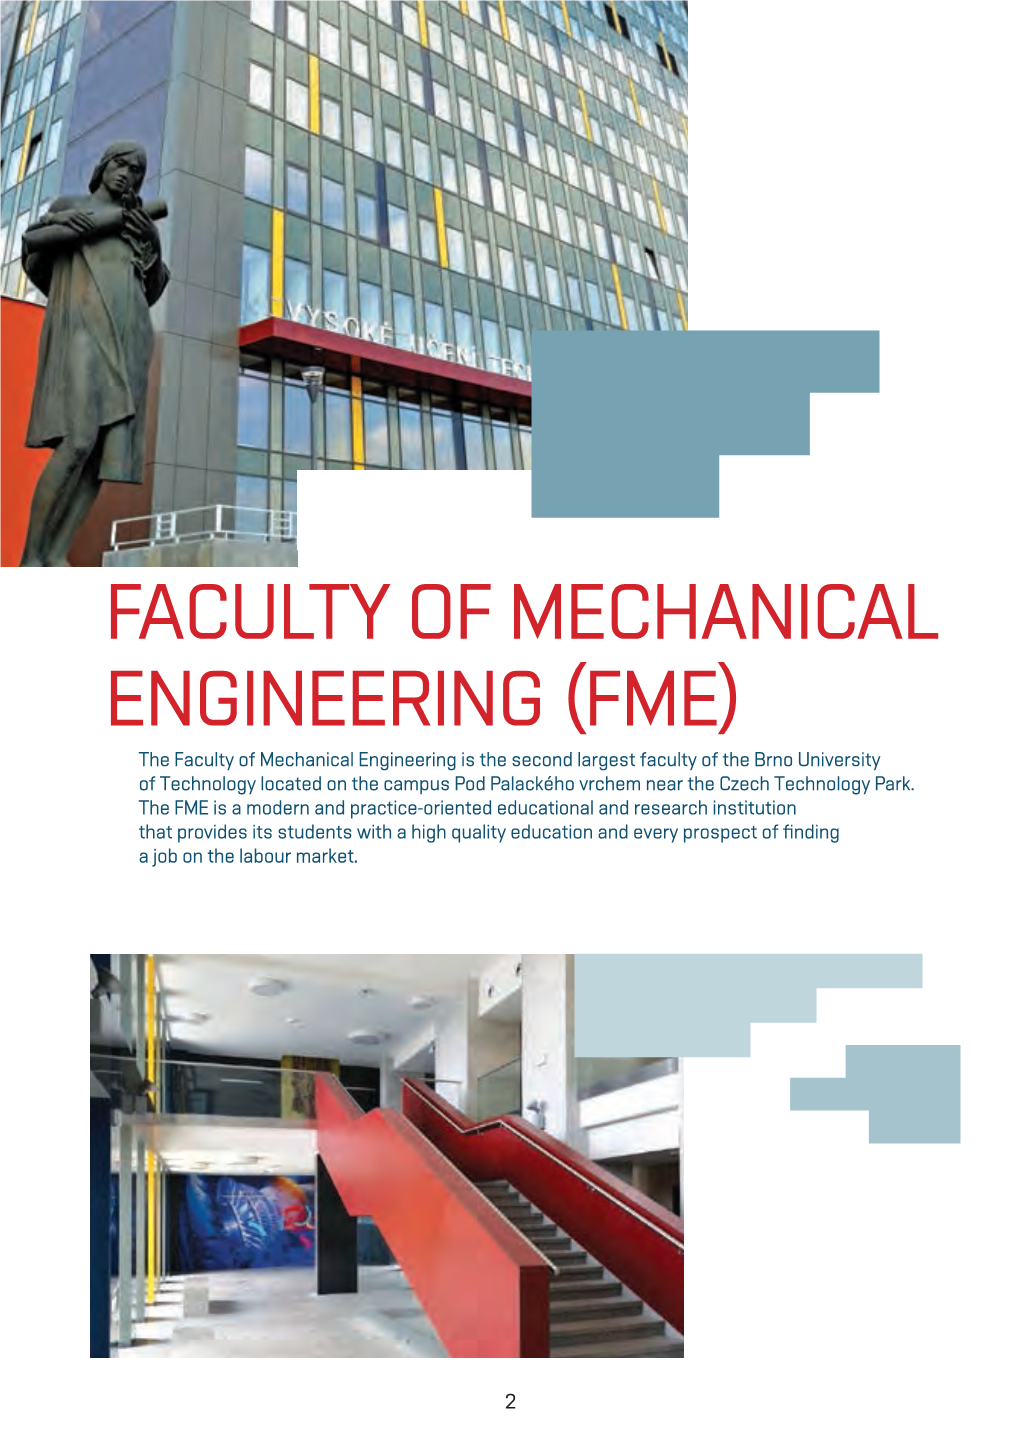 Faculty of Mechanical Engineering (FME)